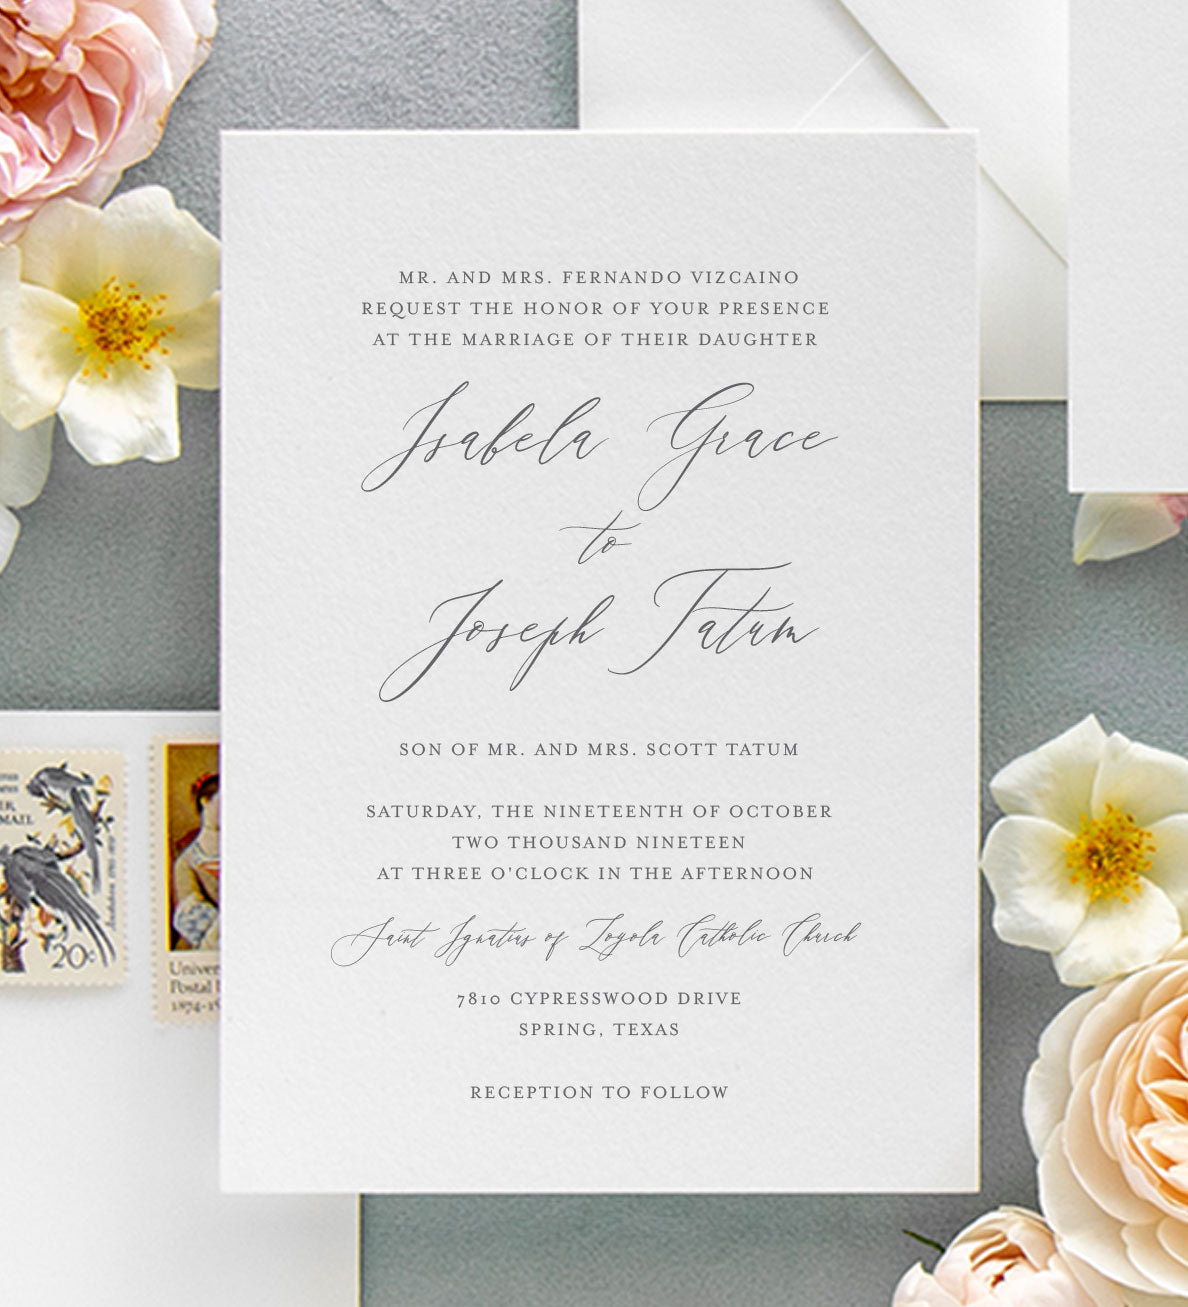 Invitation Accessories & Finishing Touch